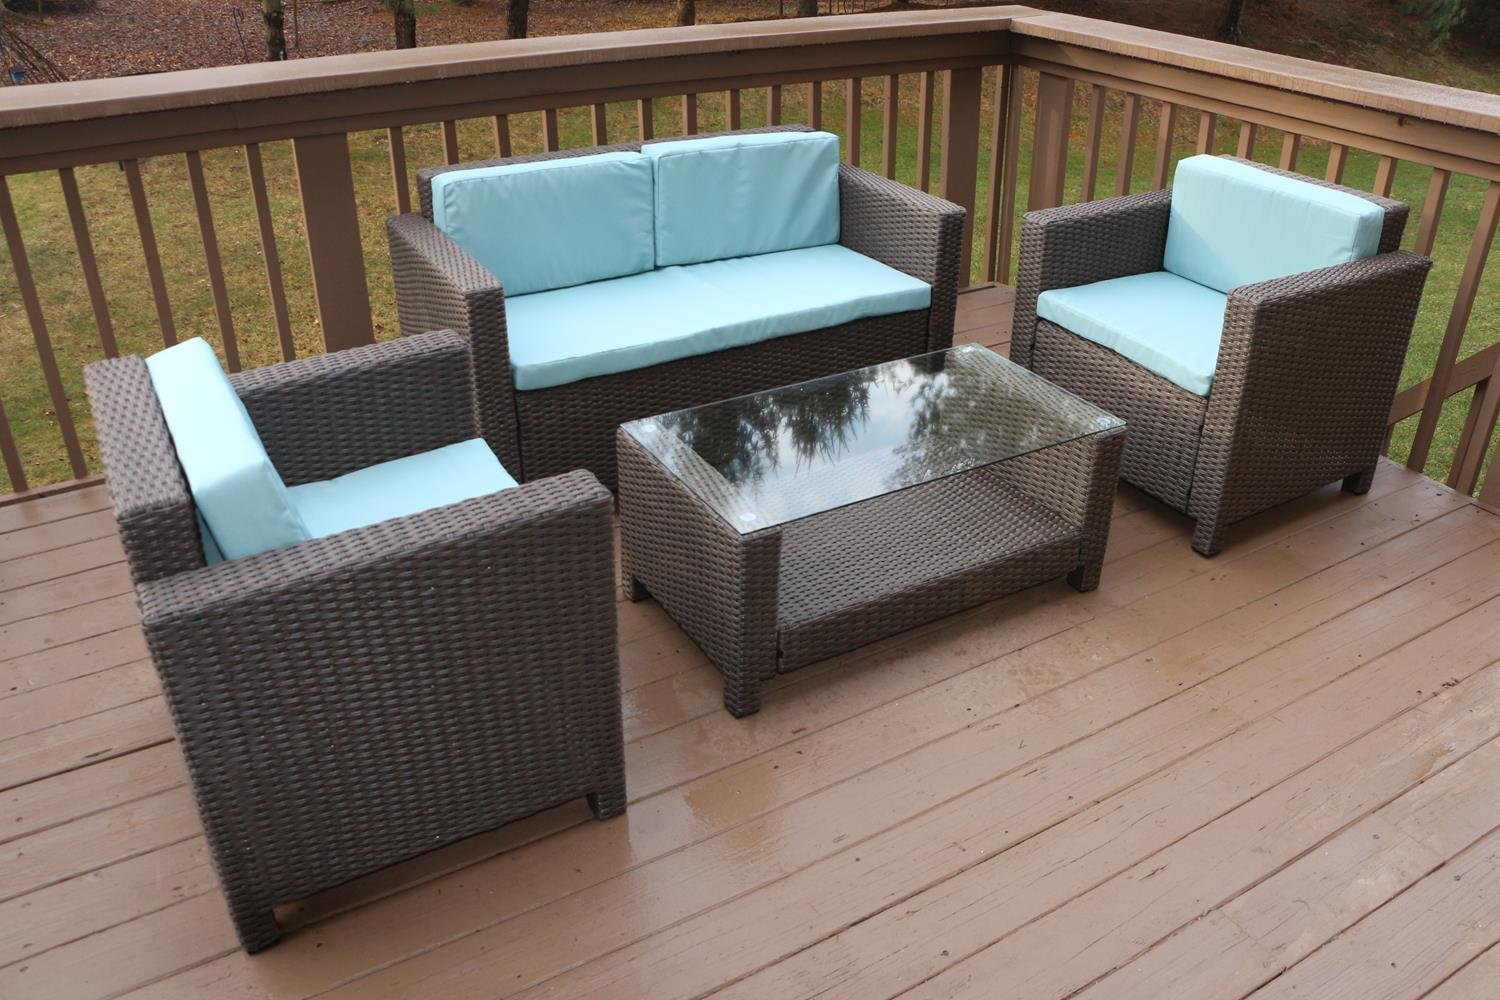 Oliver Smith - Large 4 Pc Modern Brown Rattan Wiker Sofa Set Outdoor Patio Furniture - Aluminum Frame with Ottoman - 1127 Light Blue